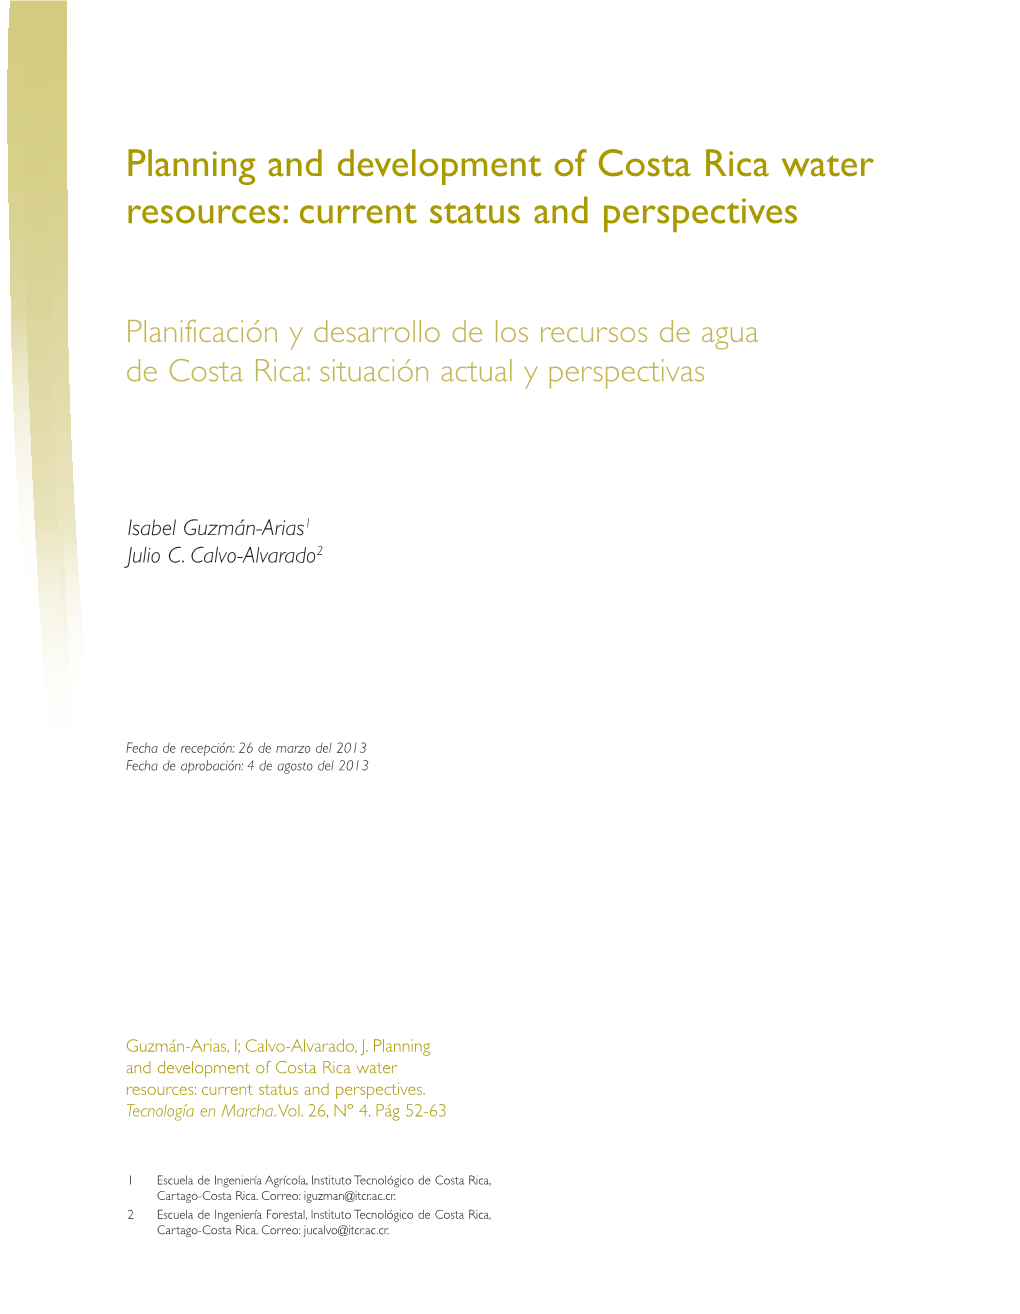 Planning and Development of Costa Rica Water Resources: Current Status and Perspectives